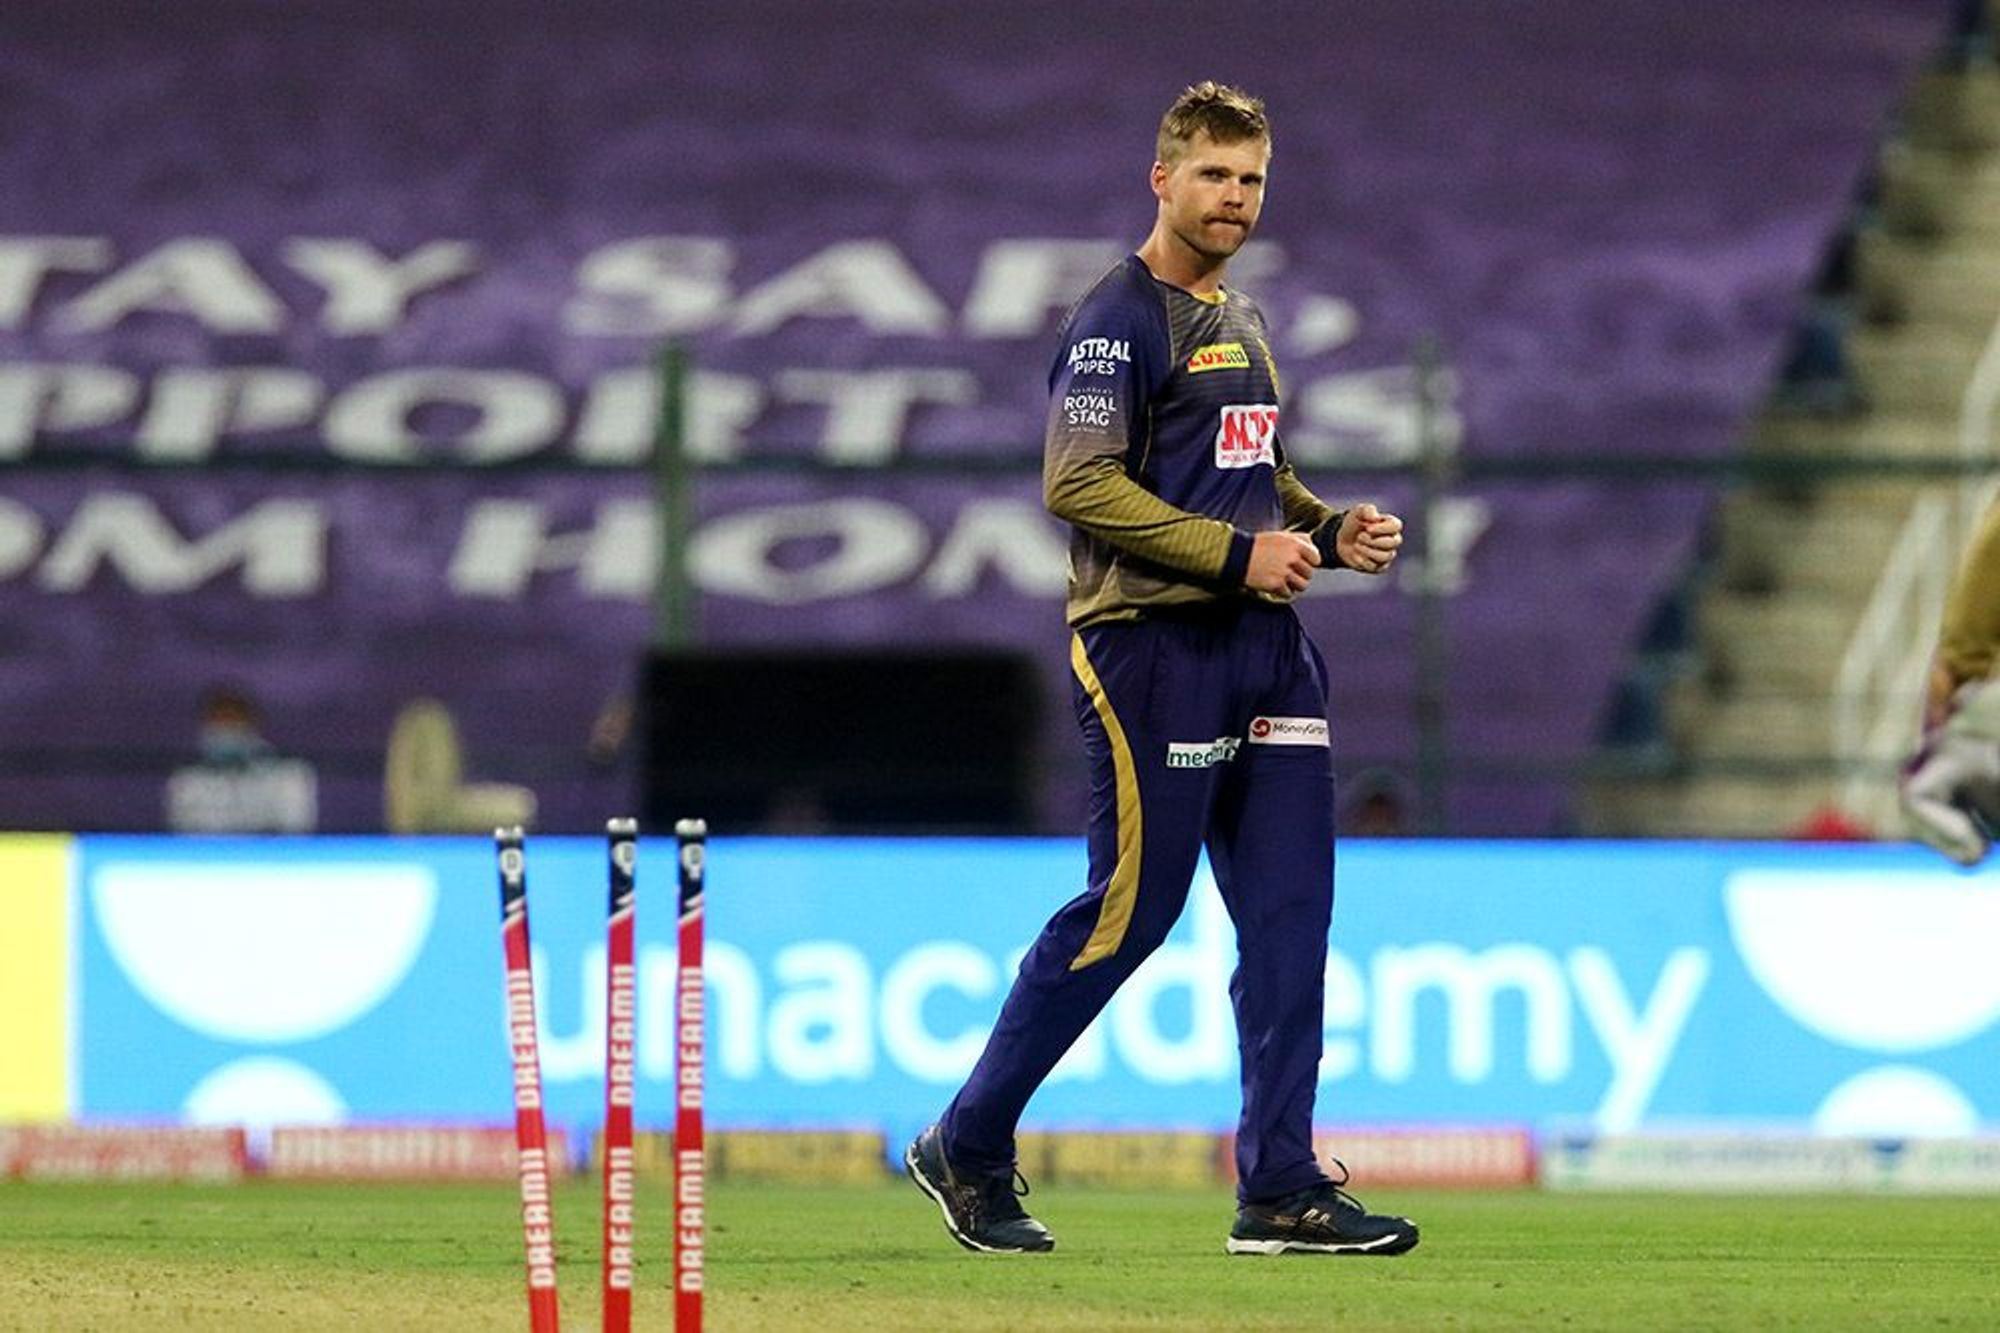 Lockie Ferguson has added another dimension to KKR bowling | BCCI/IPL